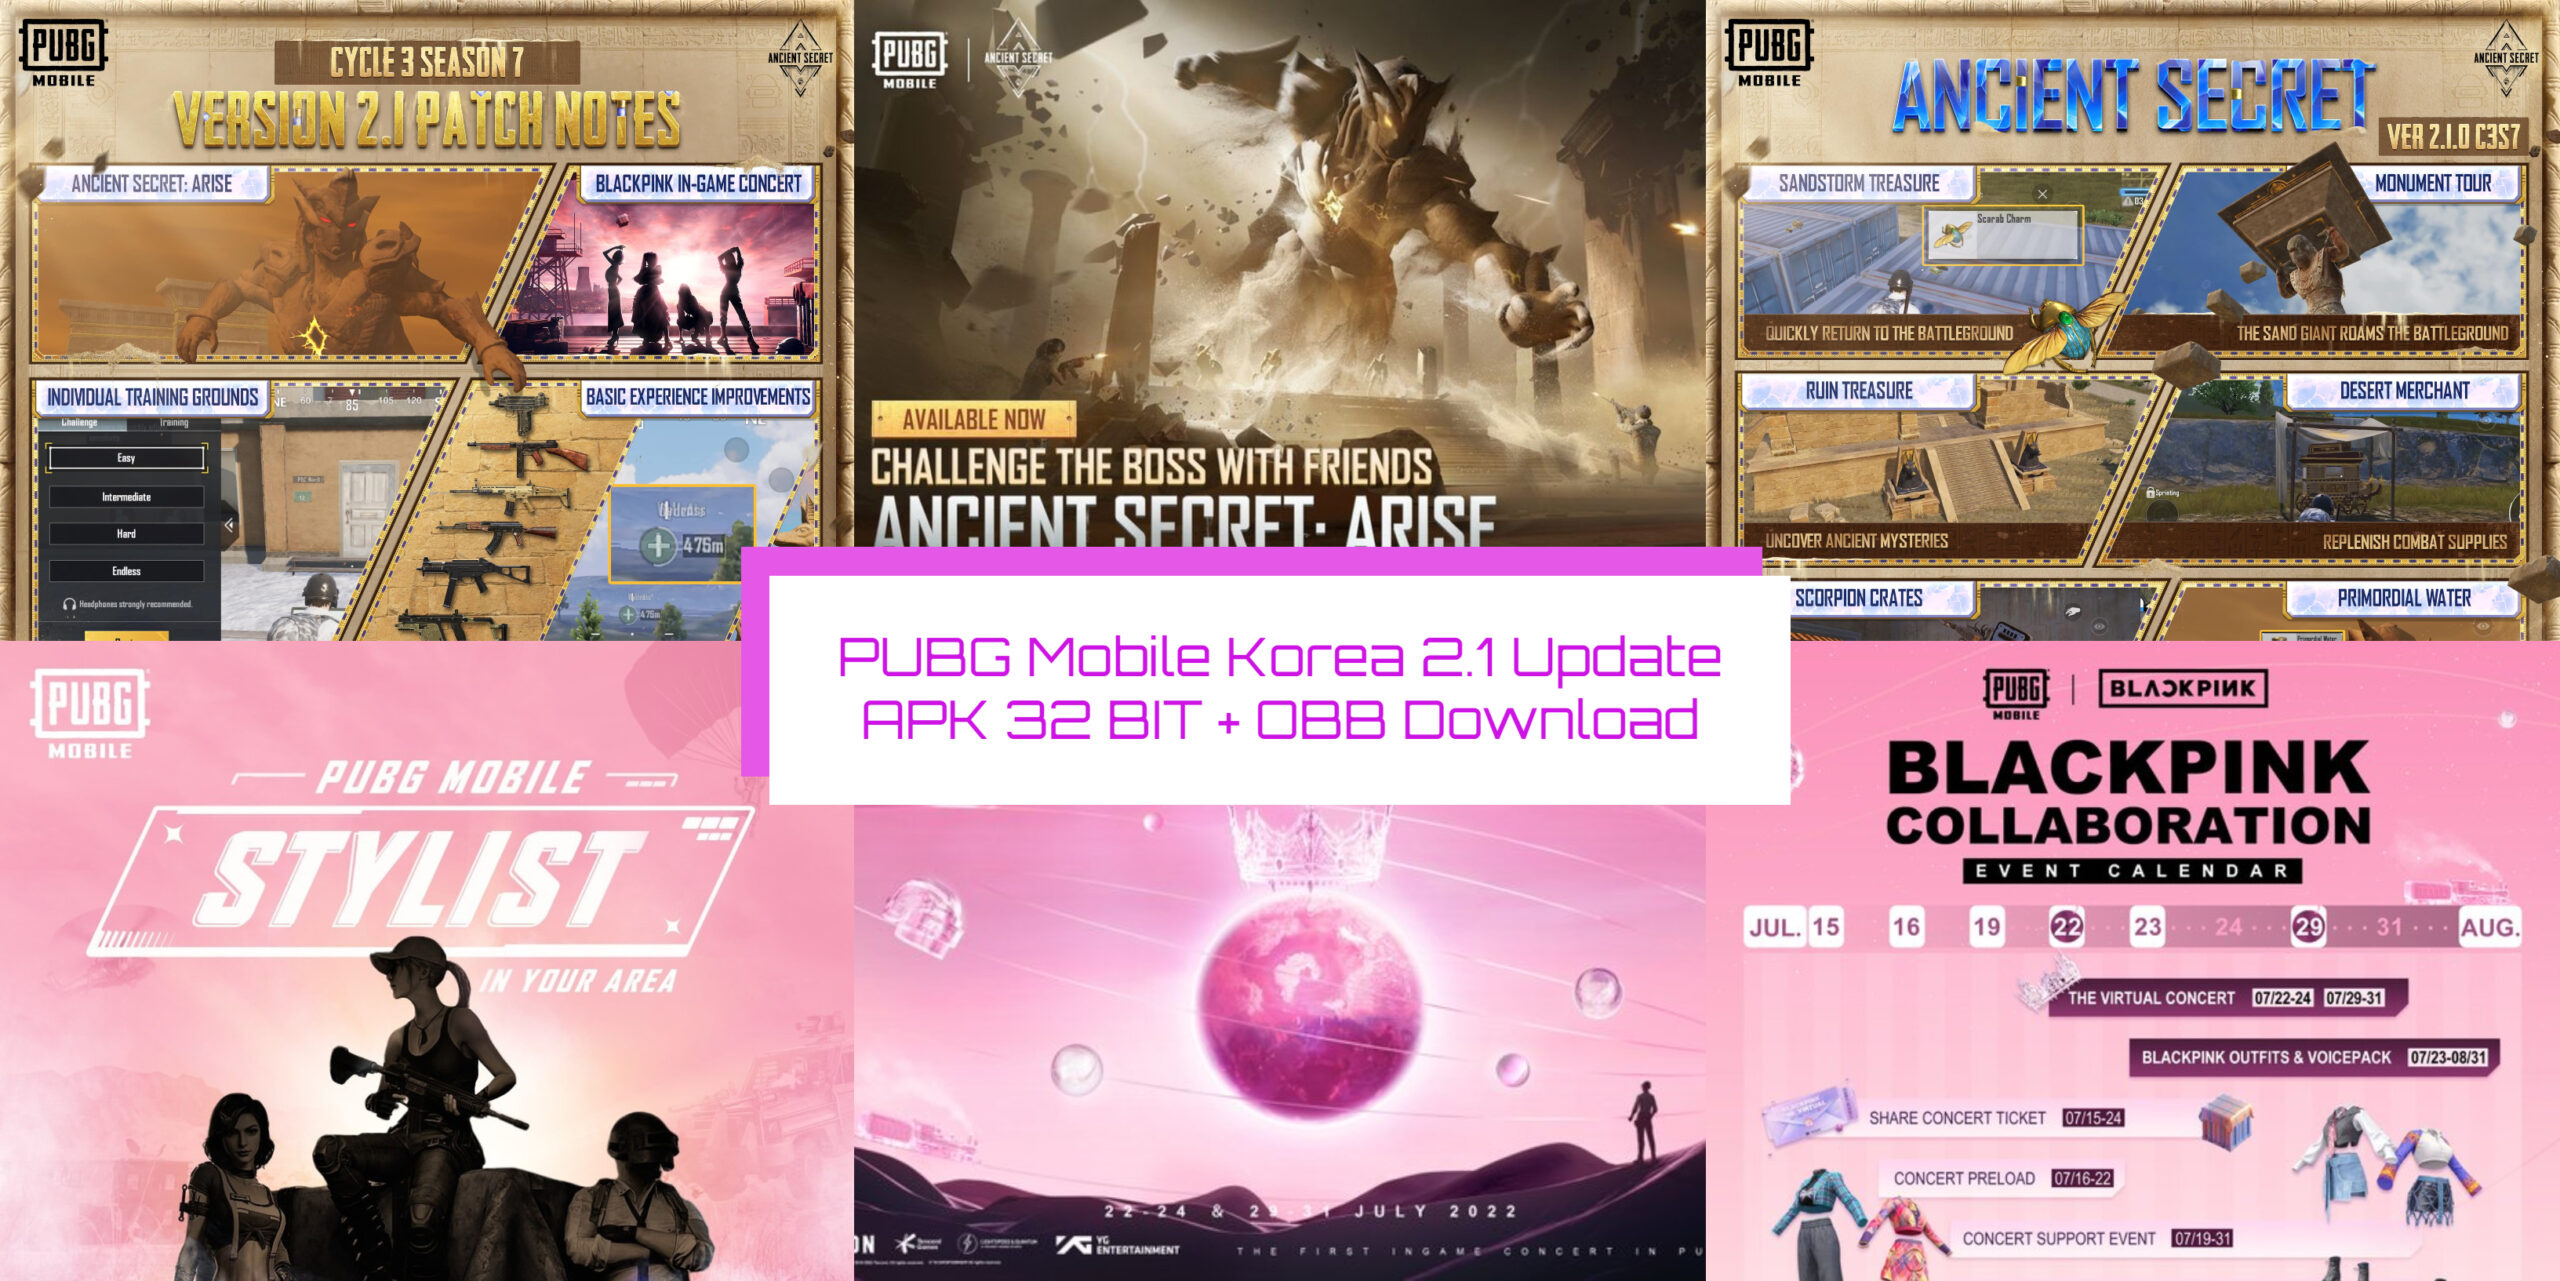 You are currently viewing PUBG Mobile KR 2.1 Update APK 32 BIT + OBB Download